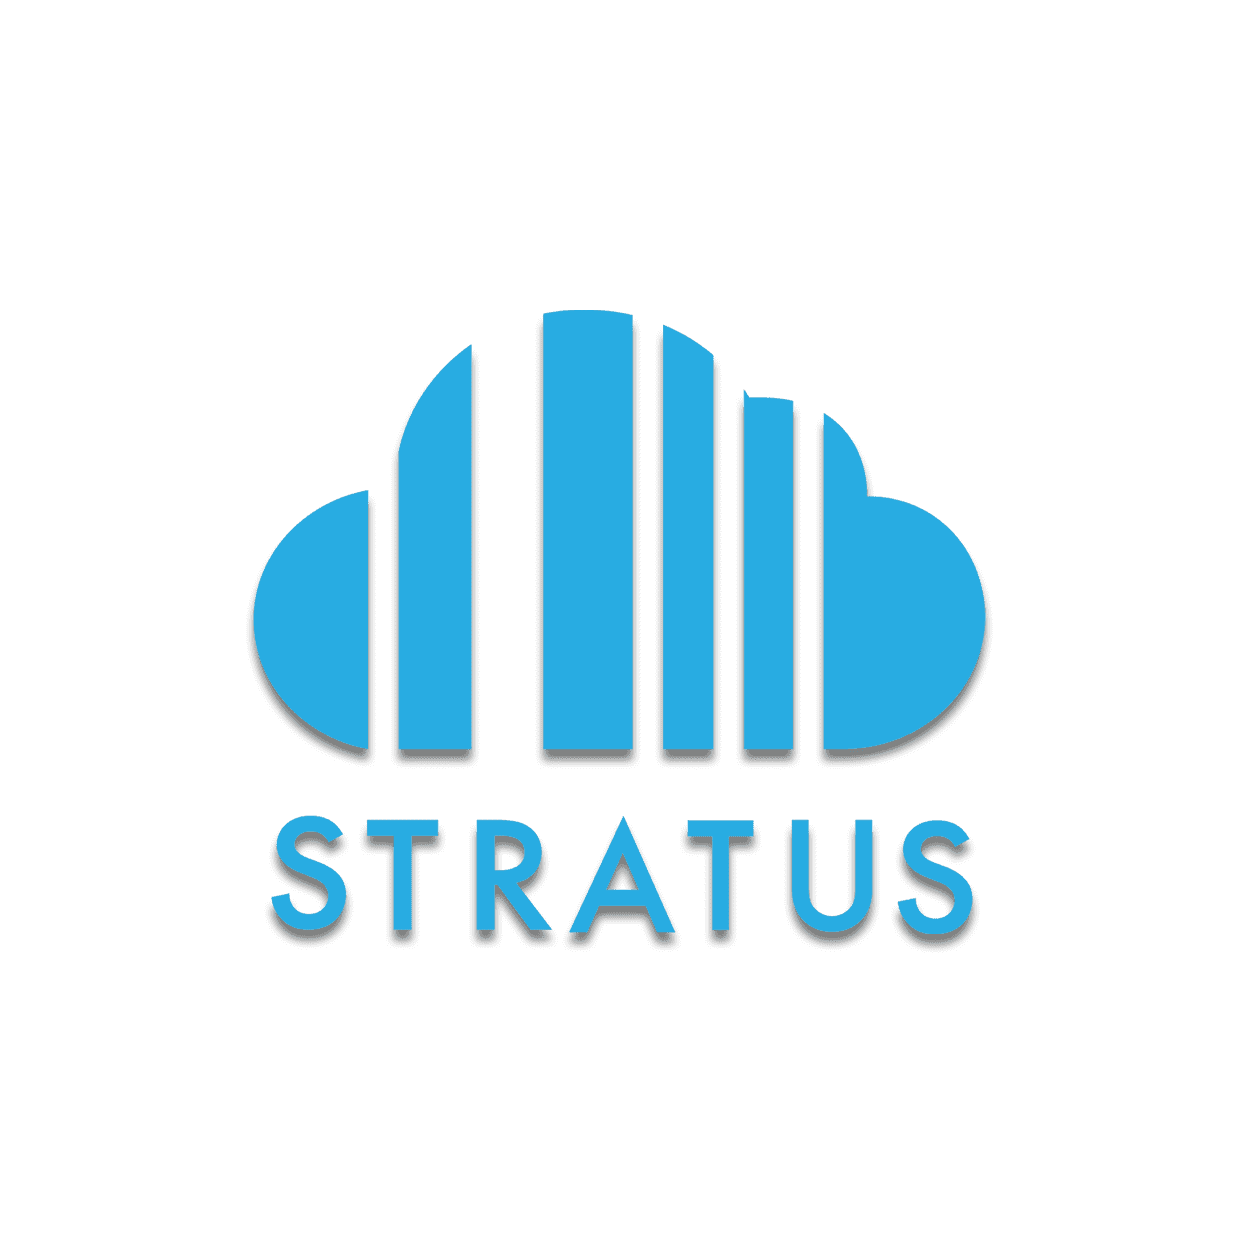 A cloud-shaped logo for the O'Neil Stratus software.  